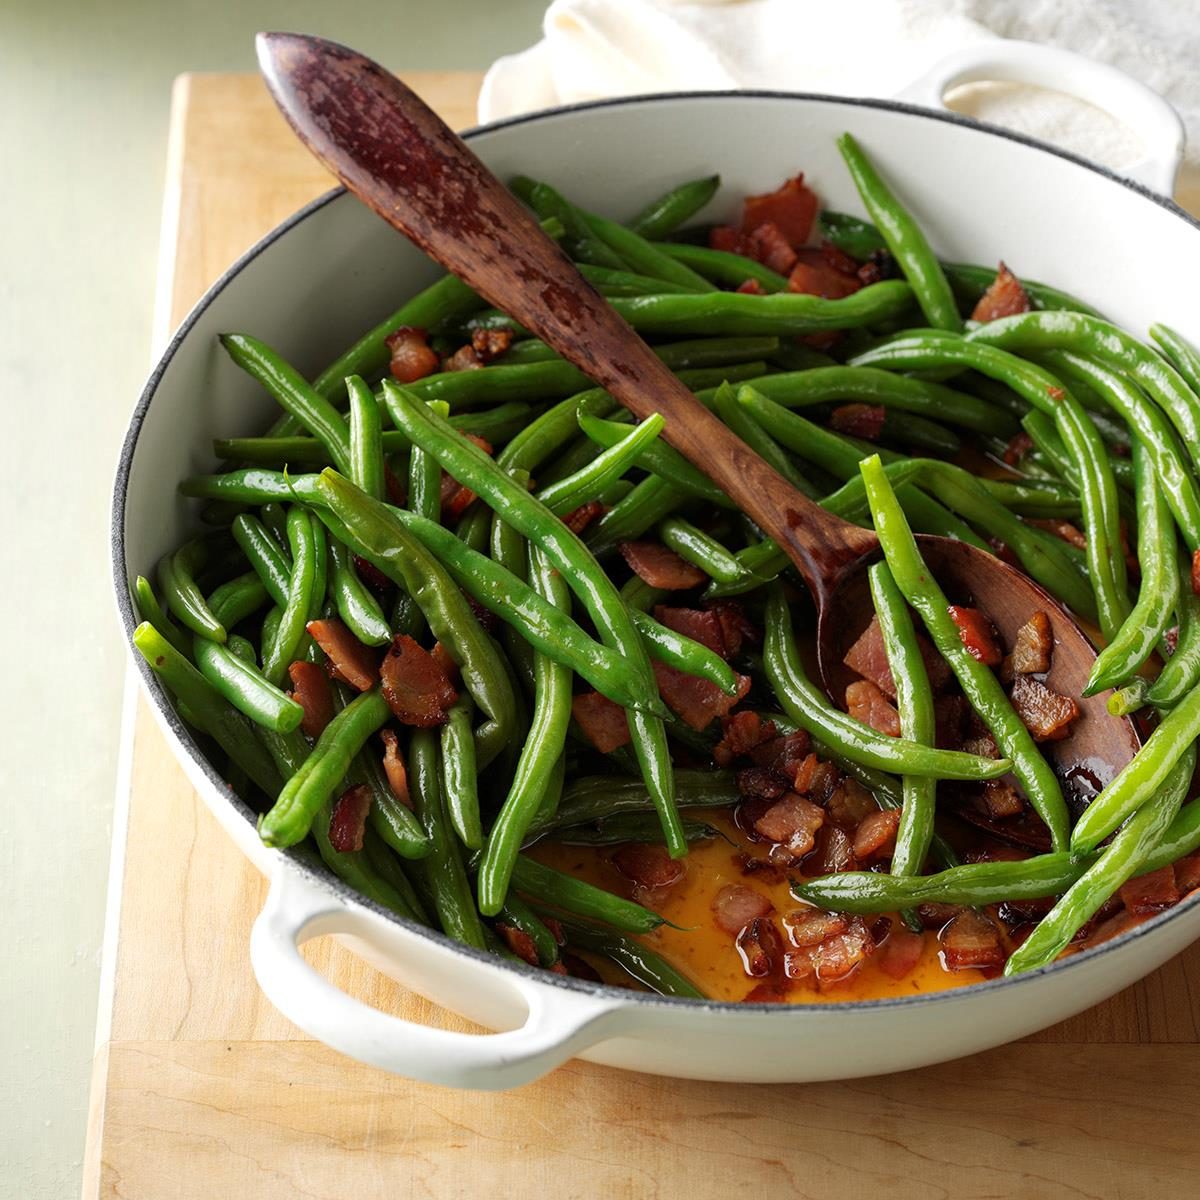 Old-fashioned green beans recipe